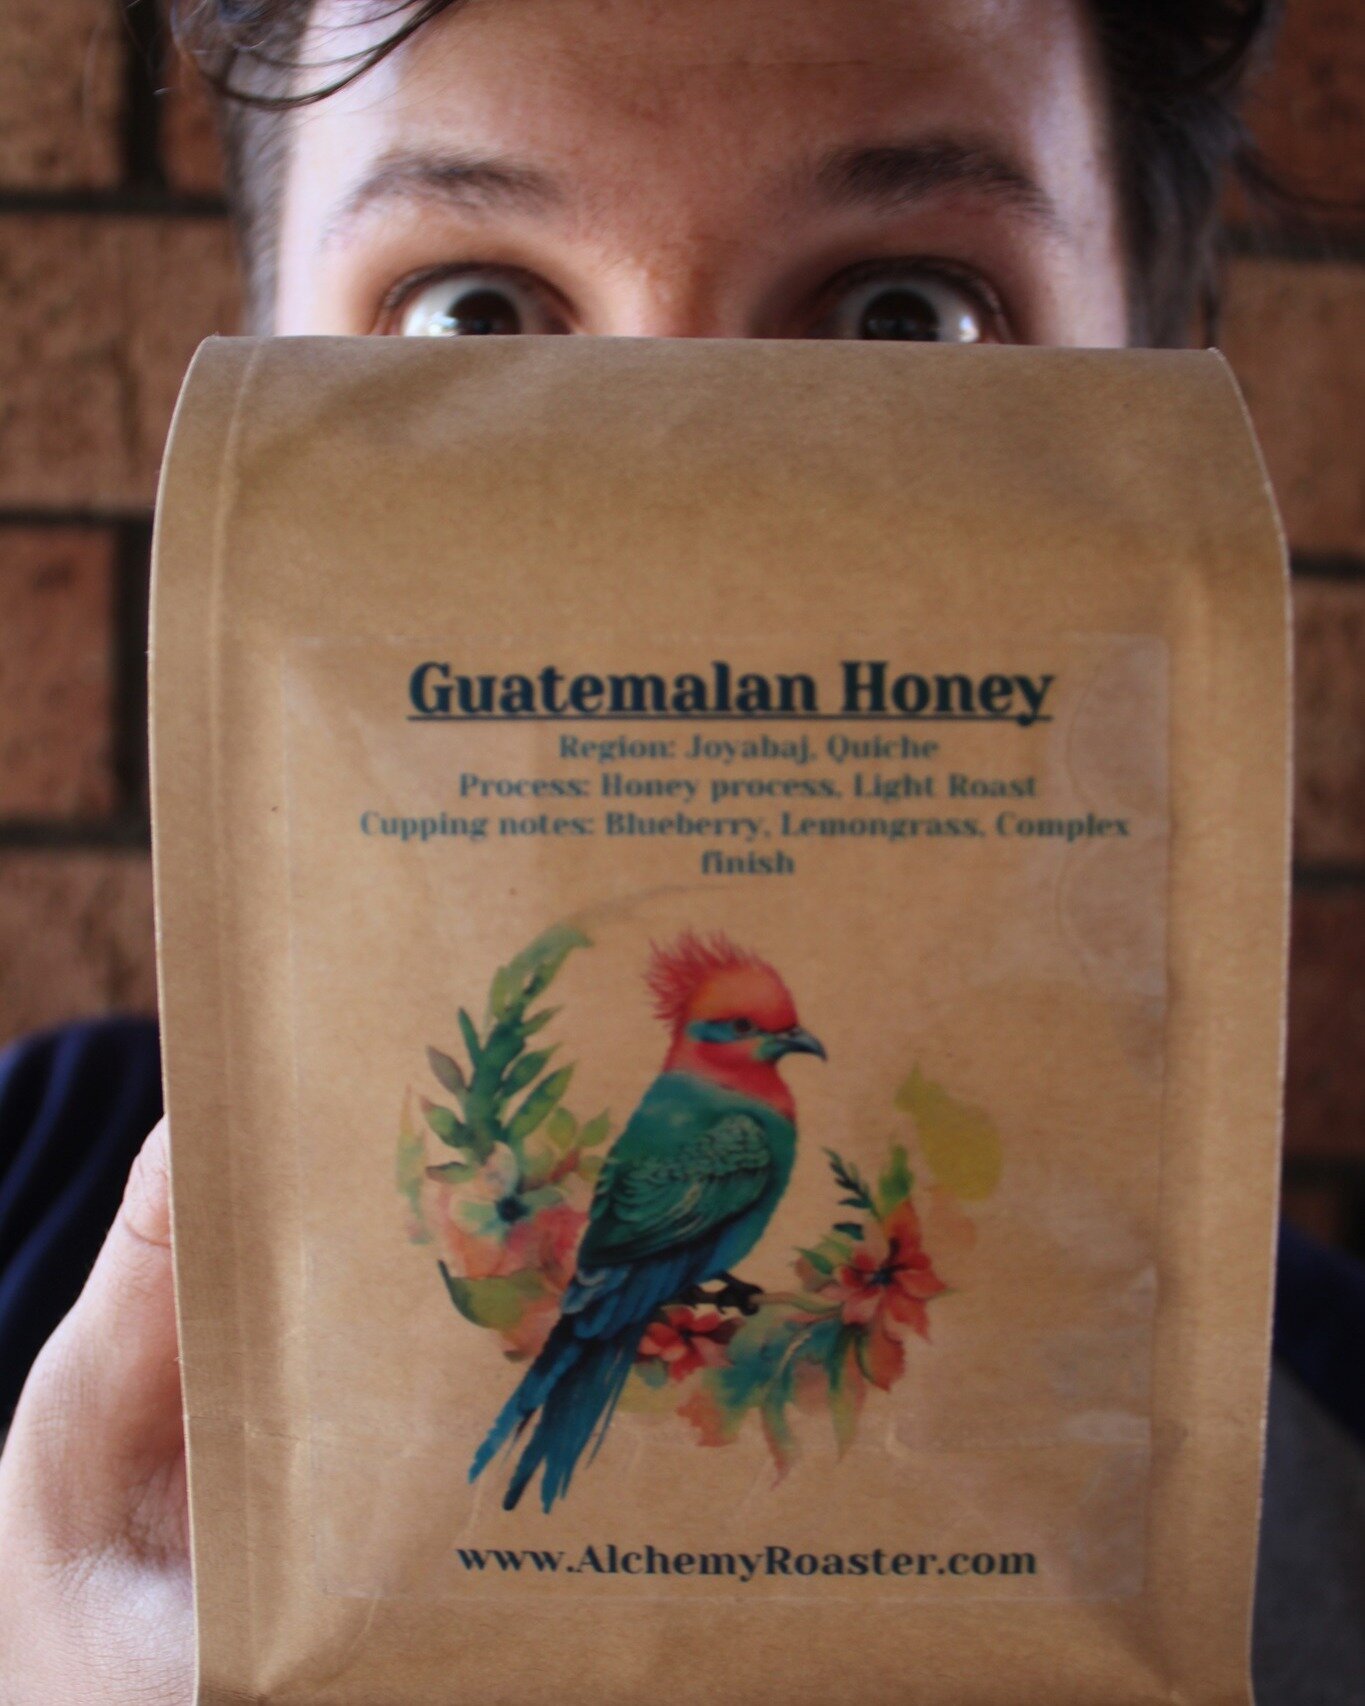 NEW COFFEE

Say hello to this honey processed Guatemalan! Guatemala is known to have some of the richest most complex coffee on the planet. This honey process takes that to another level! Not only can you taste the chocolatey notes we all know and lo